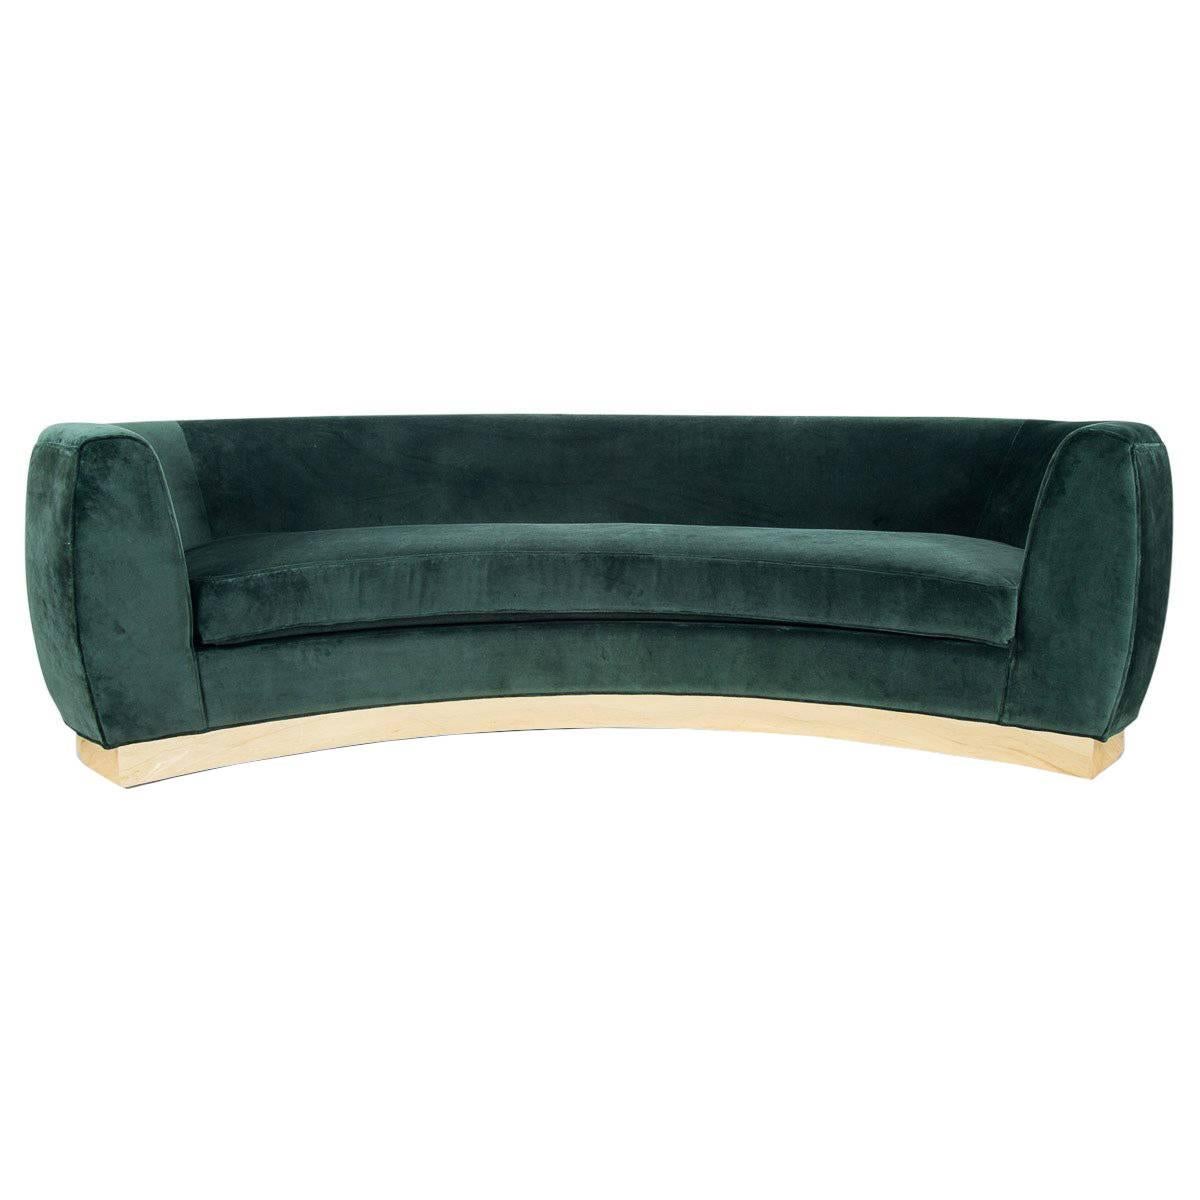 Art Deco Style St. Germain Curved Sofa in Velvet with Brass Toe-kick Base - 9 ft For Sale